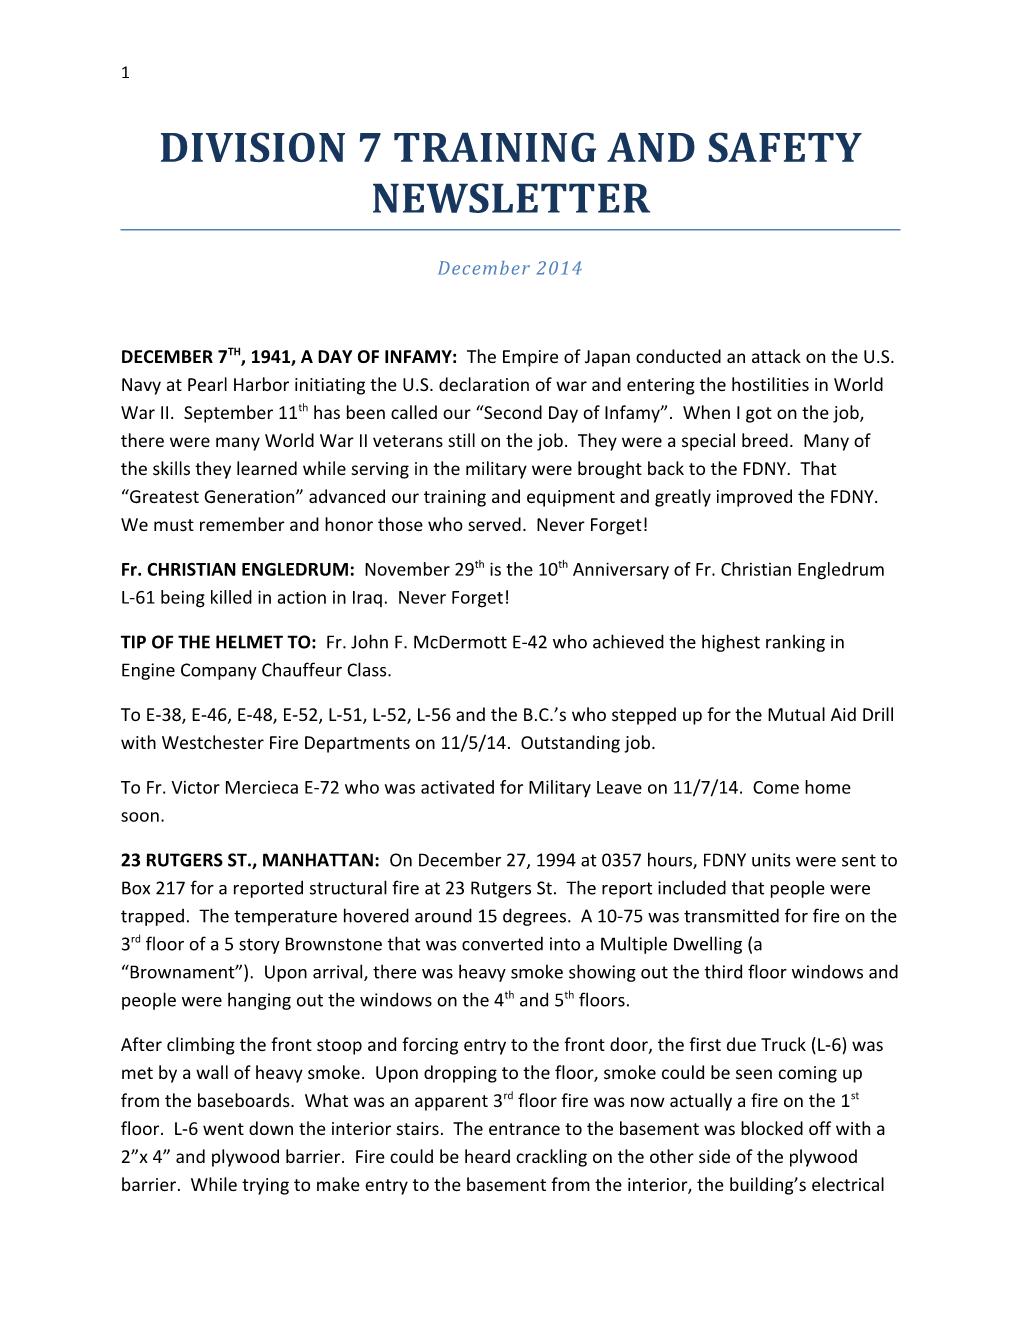 Division 7 Training and Safety Newsletter